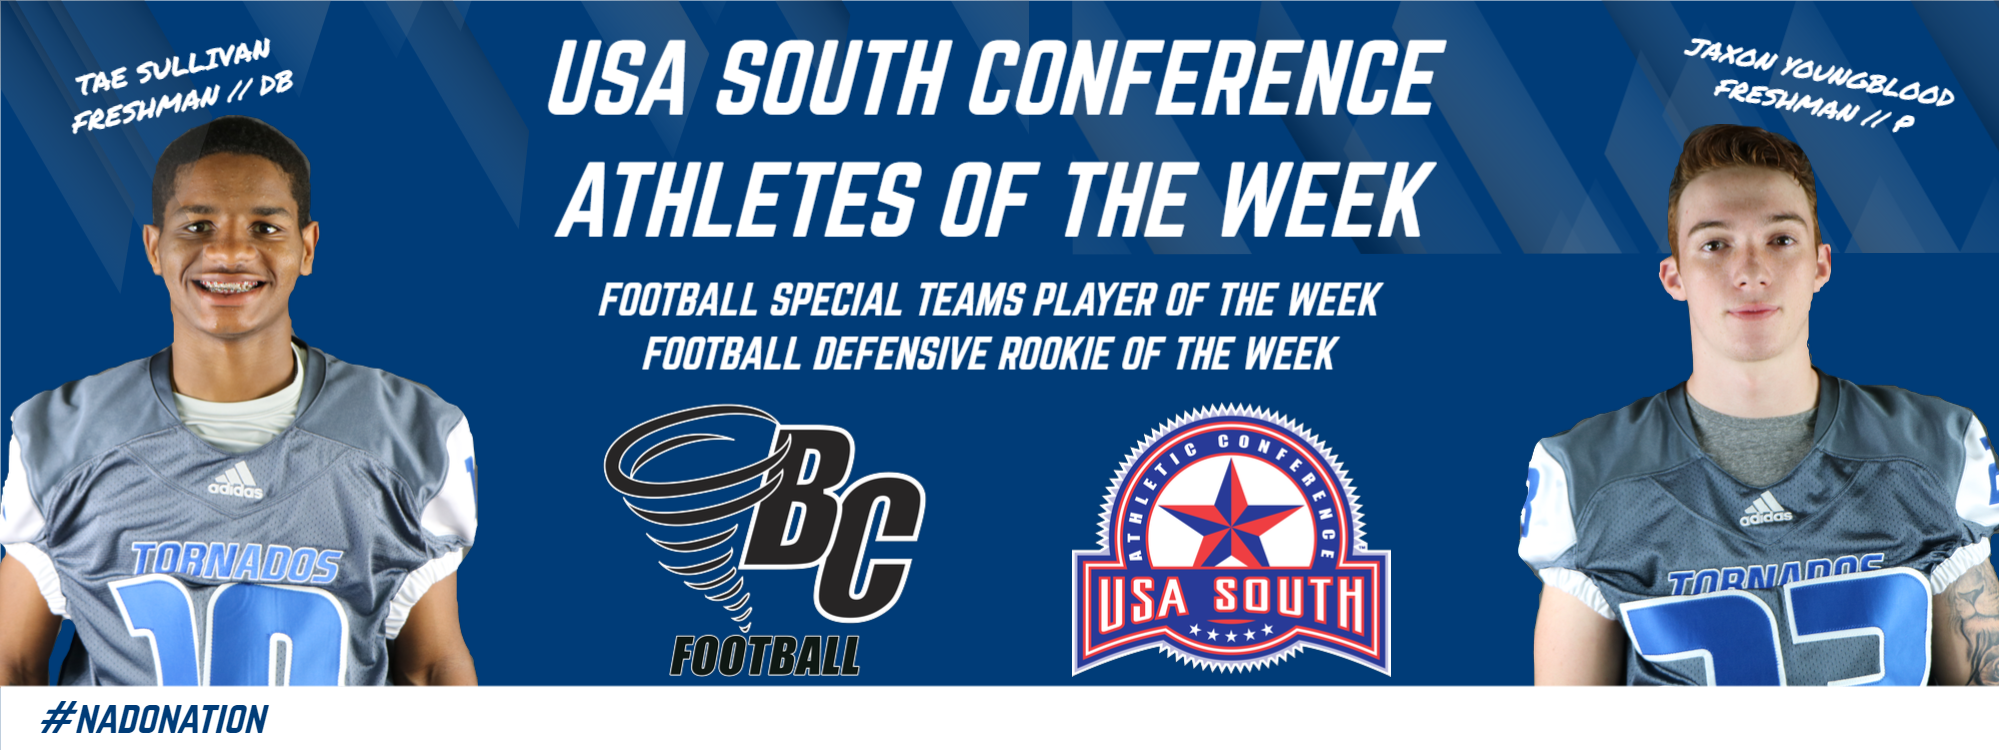 Football’s Sullivan, Youngblood Awarded USA South Weekly Honors